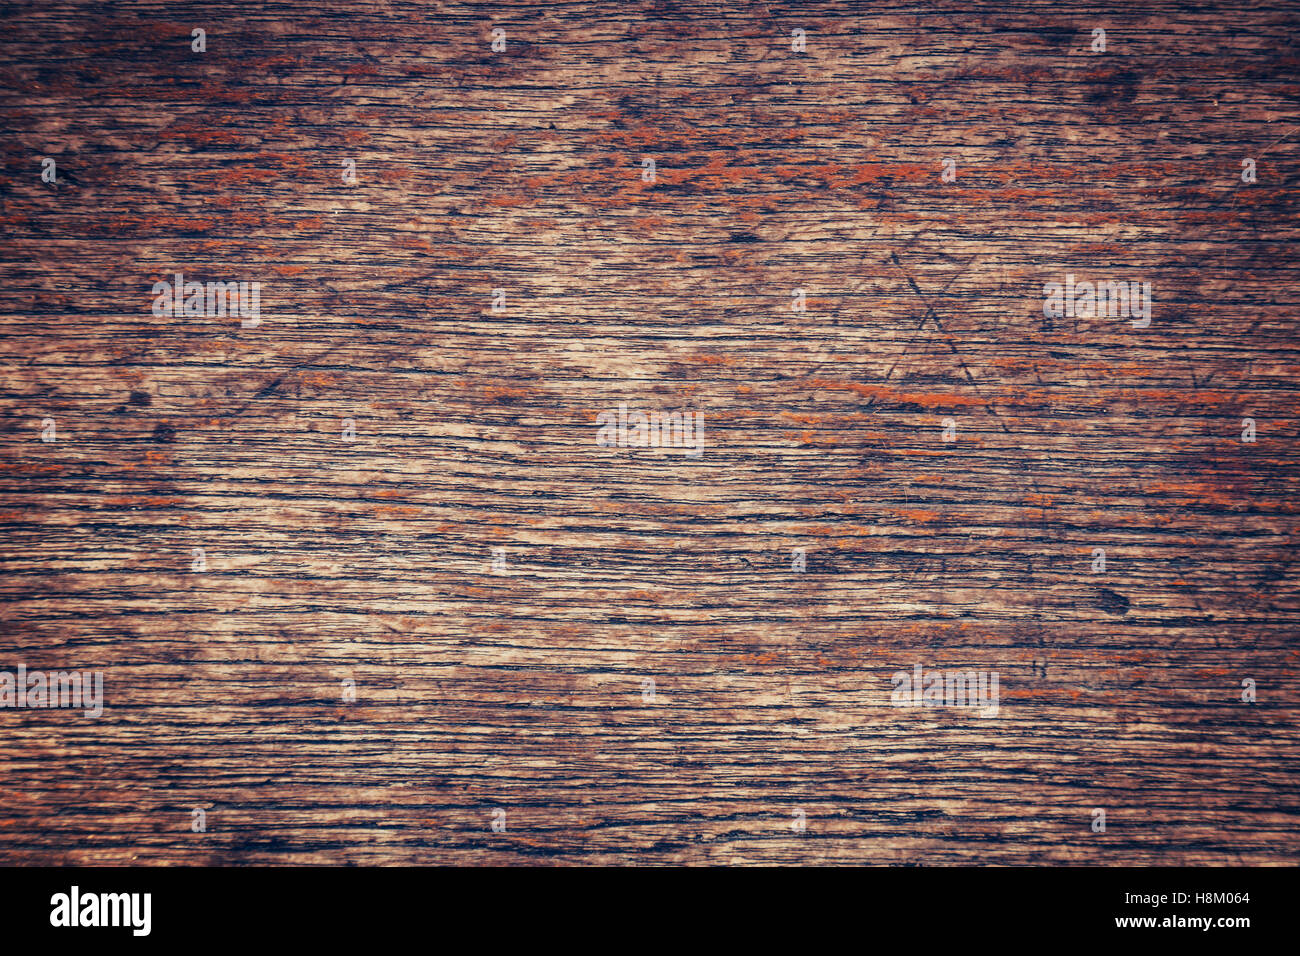 Grunge old wood background and texture, Vintage toned. Stock Photo